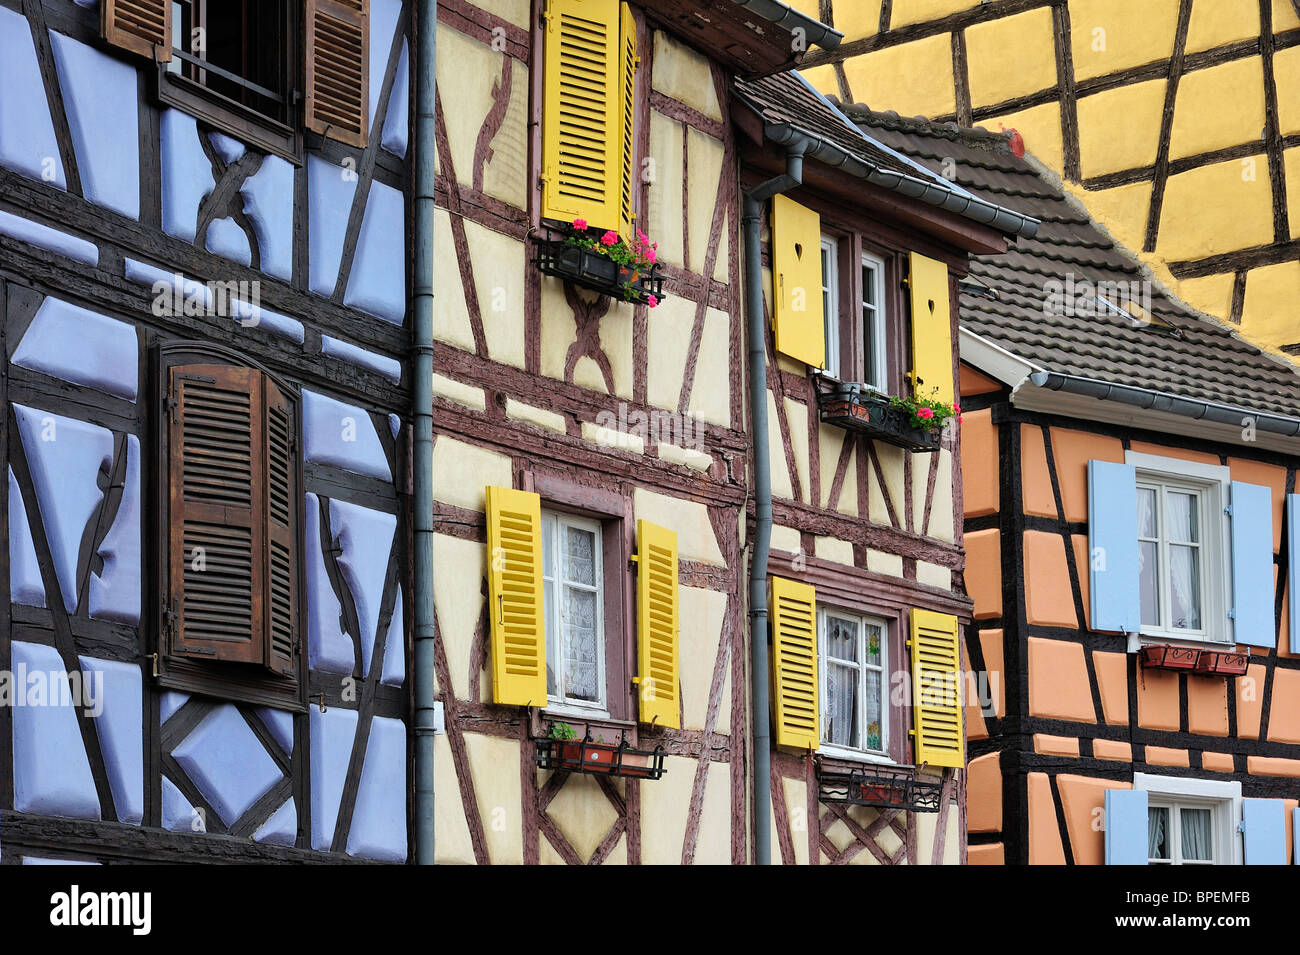 Colorful façades of timber framed houses at Petite Venise / Little Venice, Colmar, Alsace, France Stock Photo